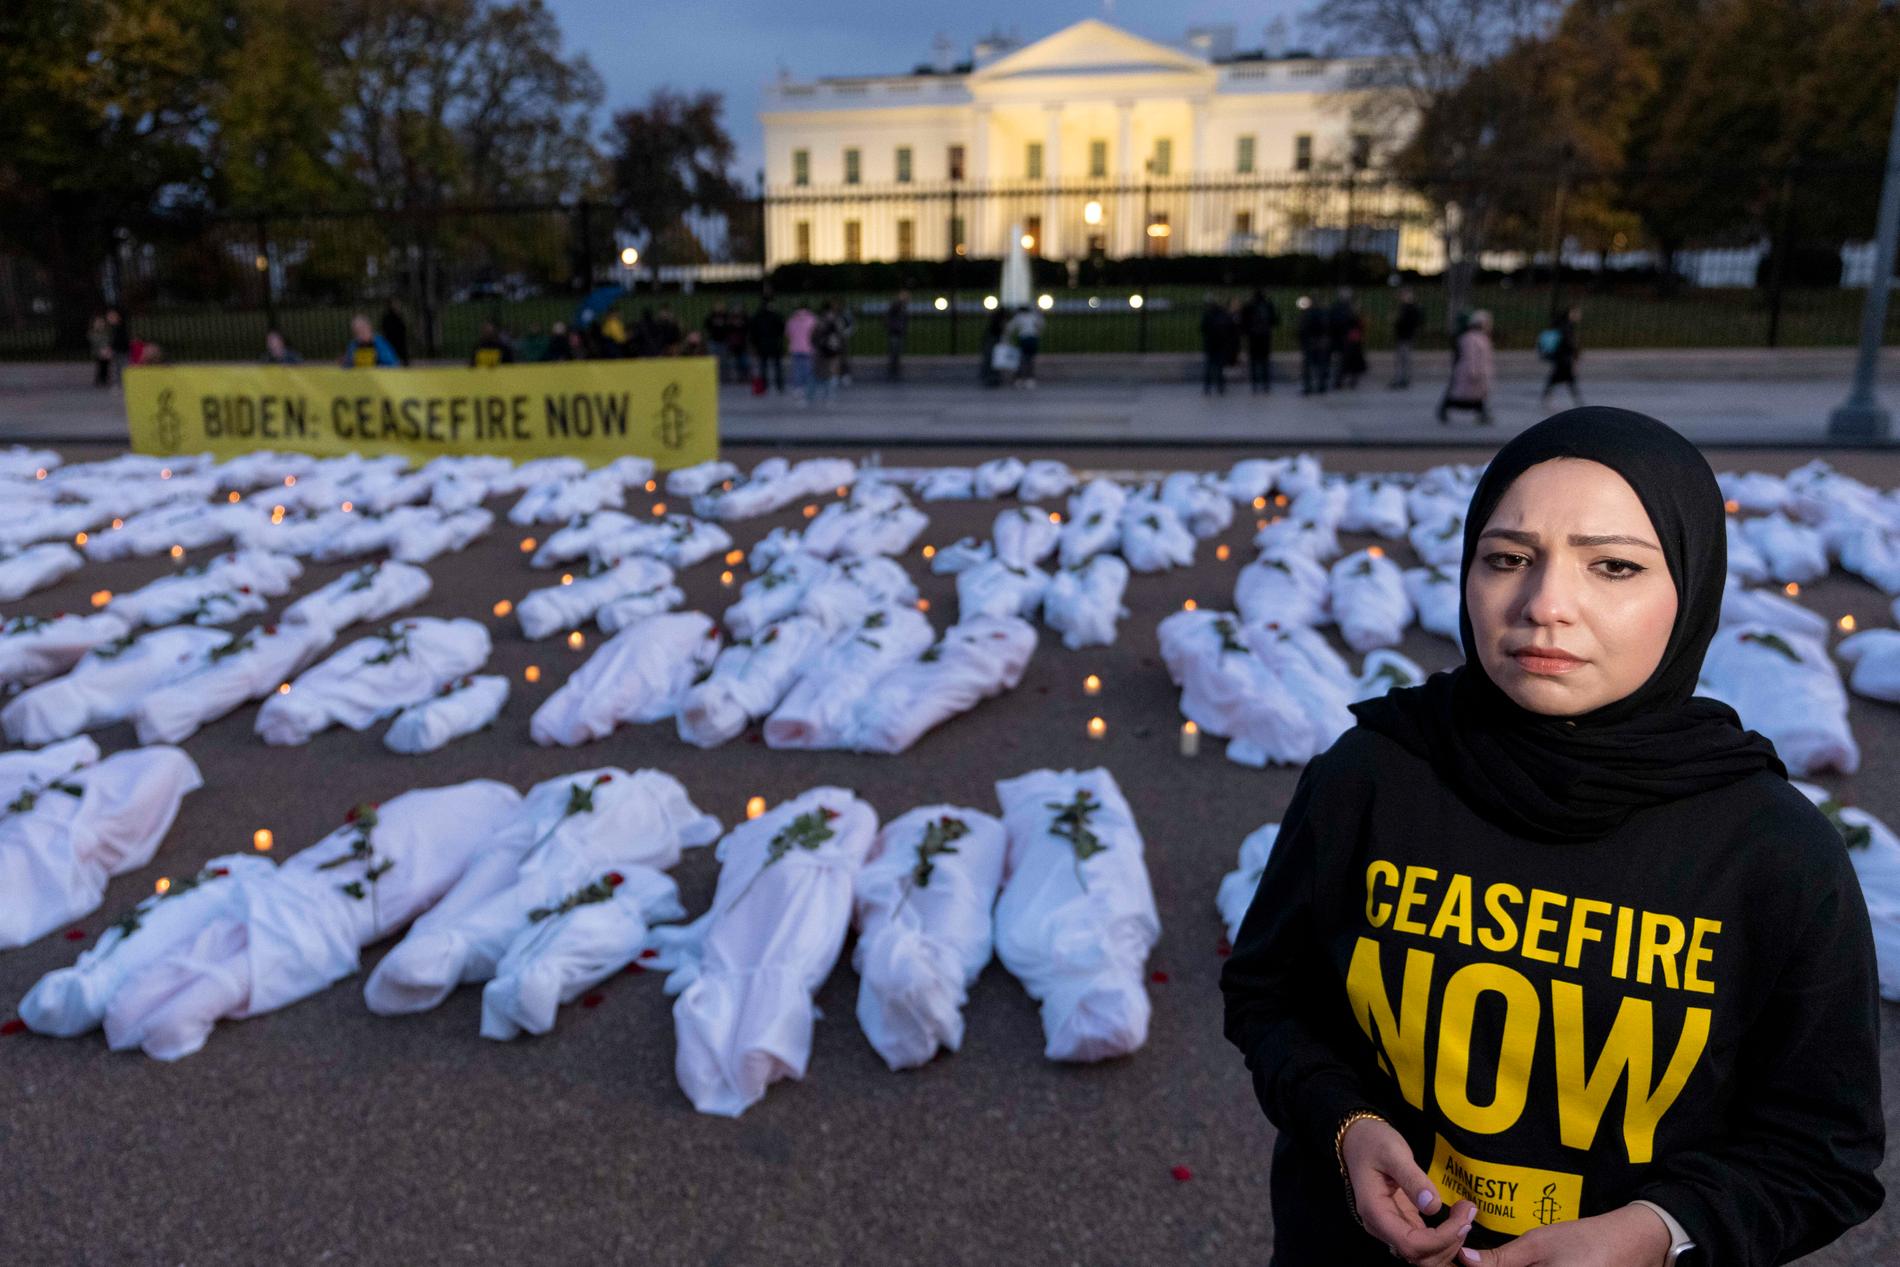 Body bags: Amnesty International placed fake body bags in front of the White House and called for a ceasefire in an action on November 15. 